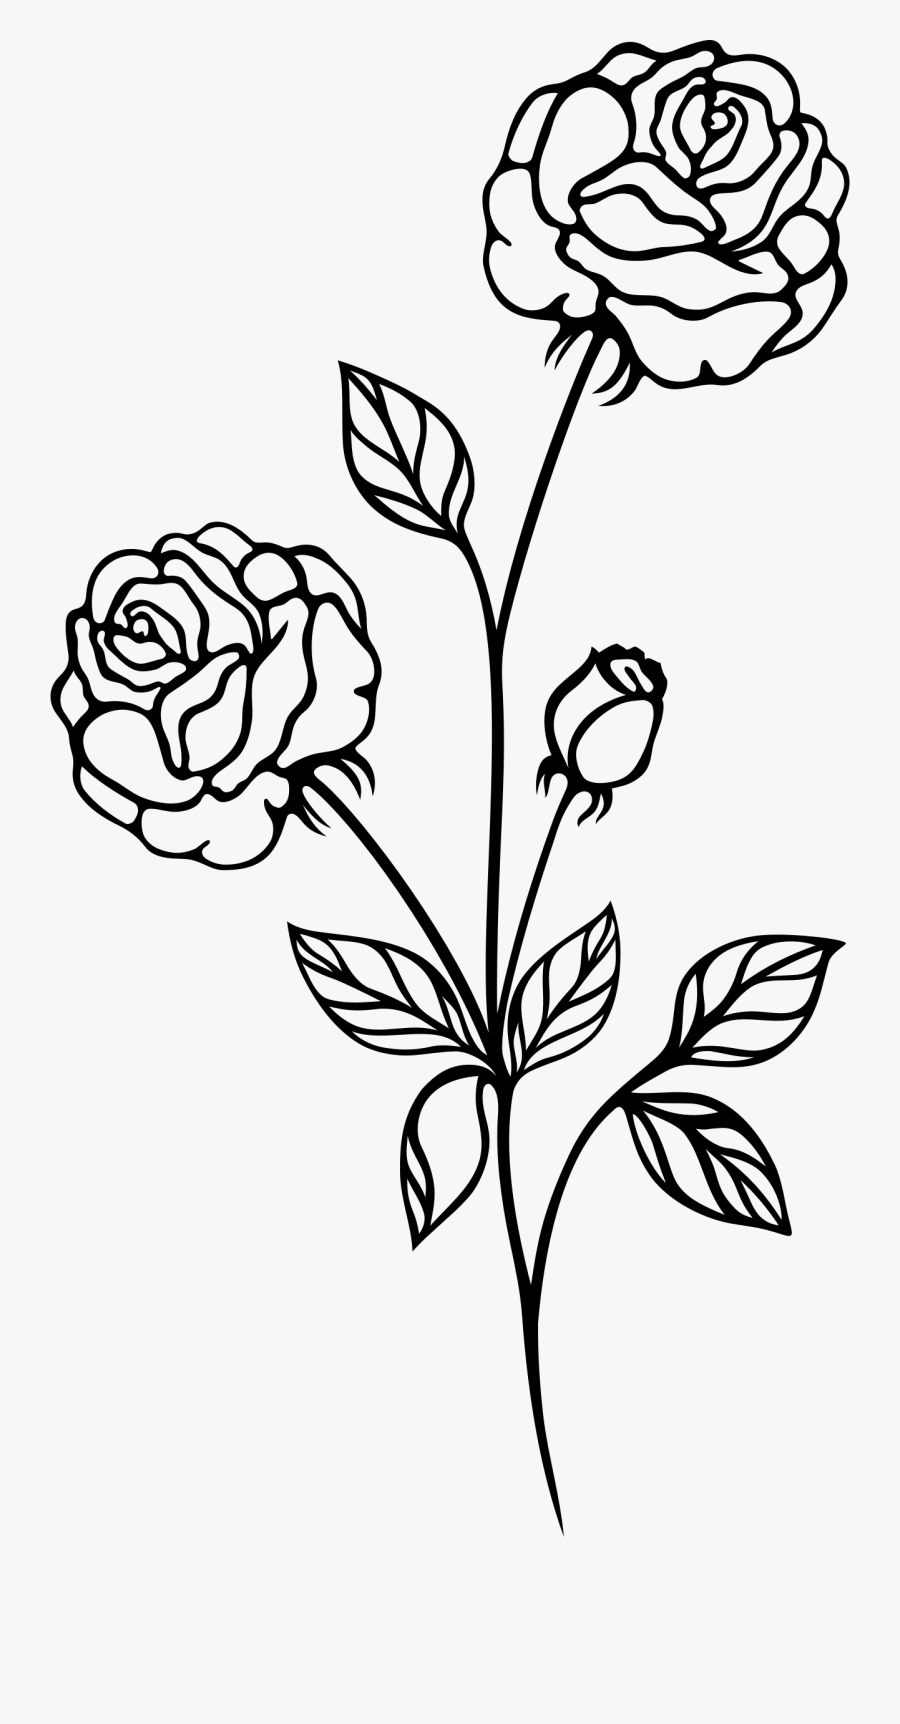 Rose Clipart Black And White - Rose Plant Black And White, Transparent Clipart